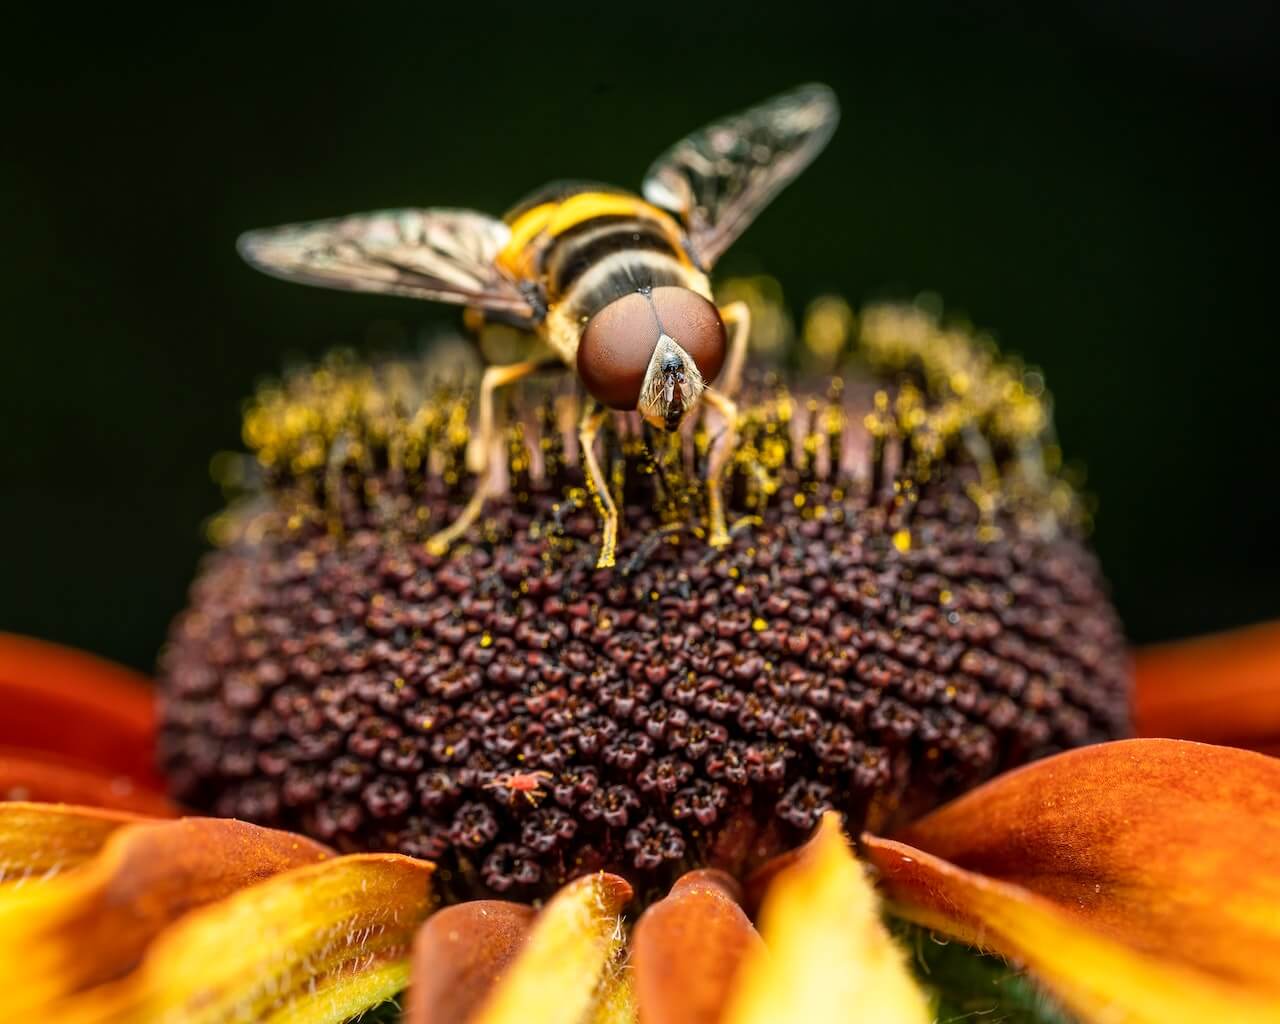 A close-up of a hornet pollinating big yellow flower
